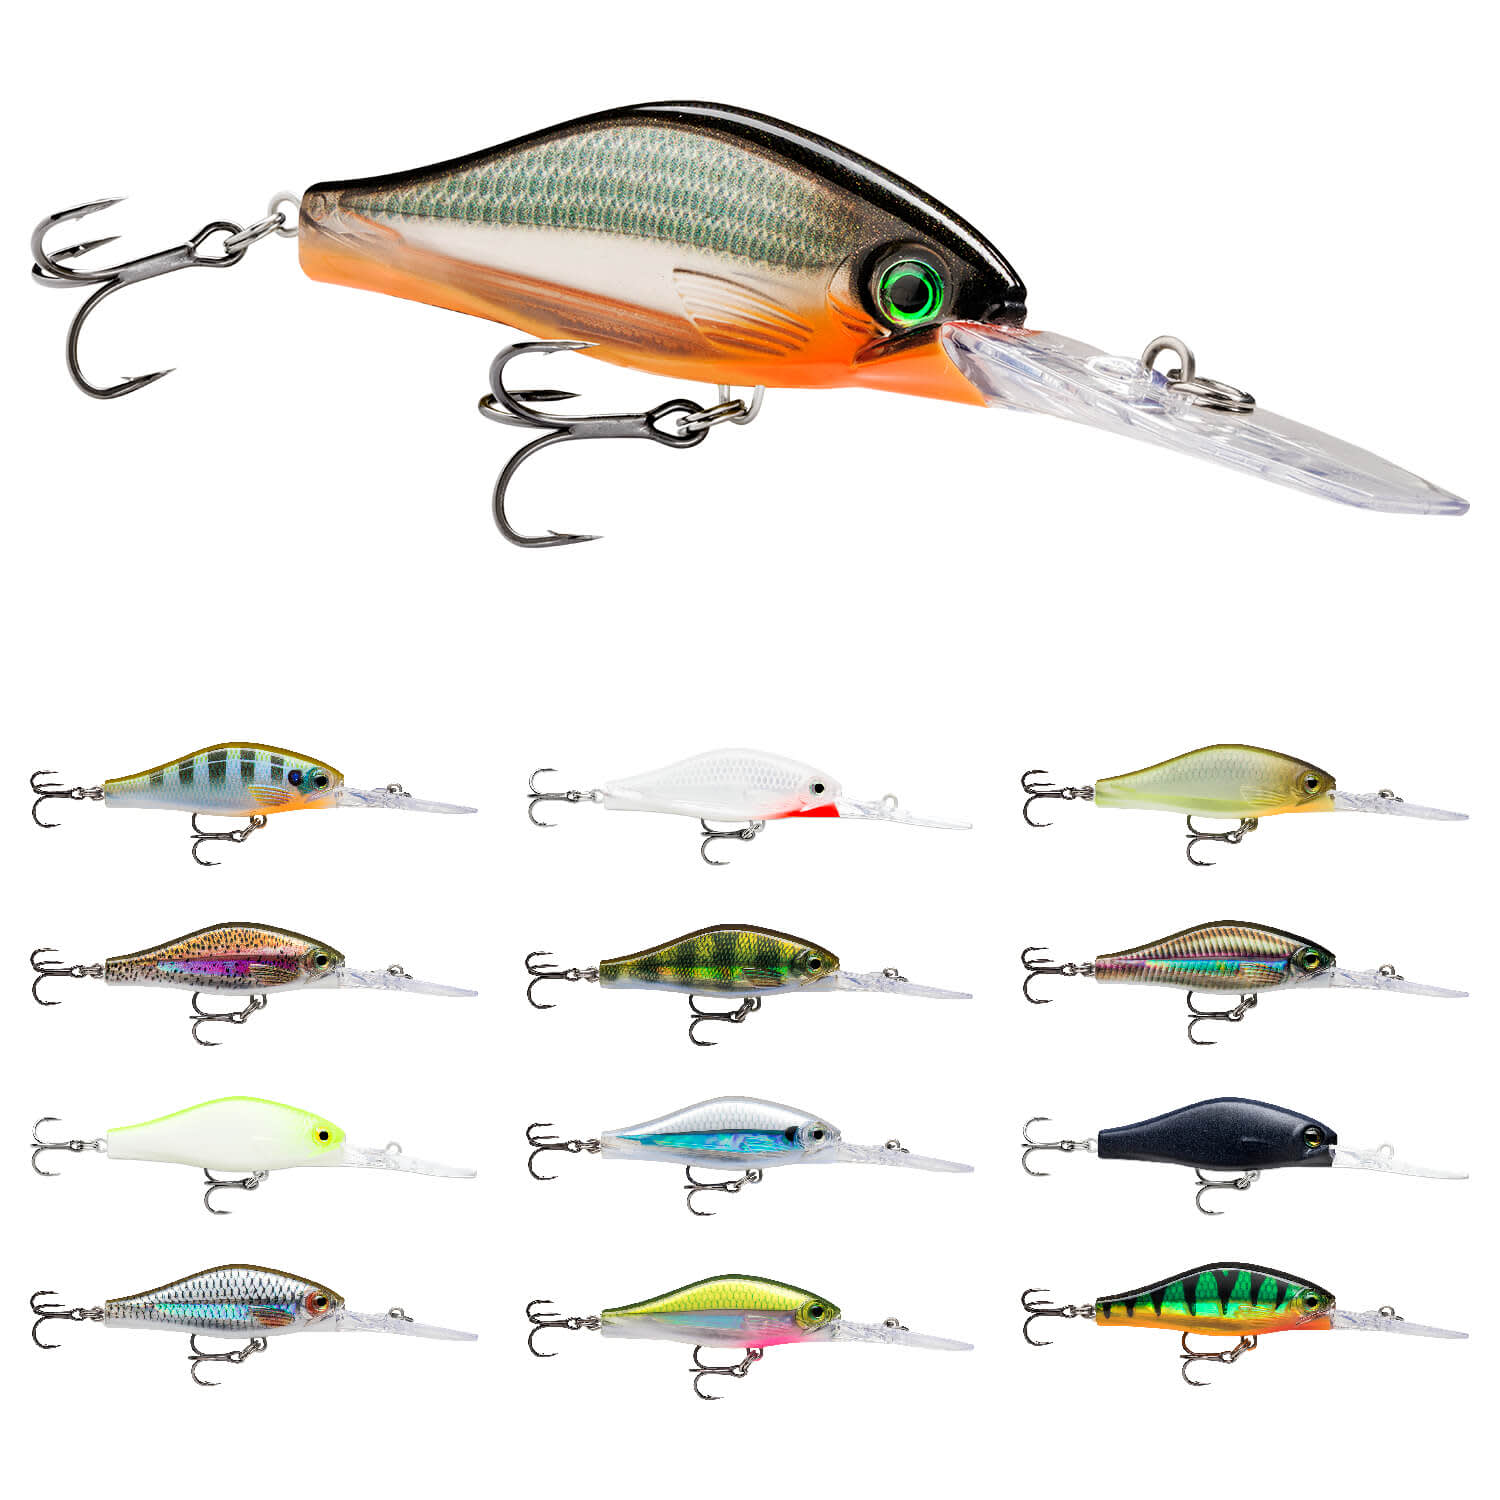 https://koeder-laden.mo.cloudinary.net/out/pictures/master/product/1/rapala-shadow-rap-jack-deep-wobbler-alle-13.jpg